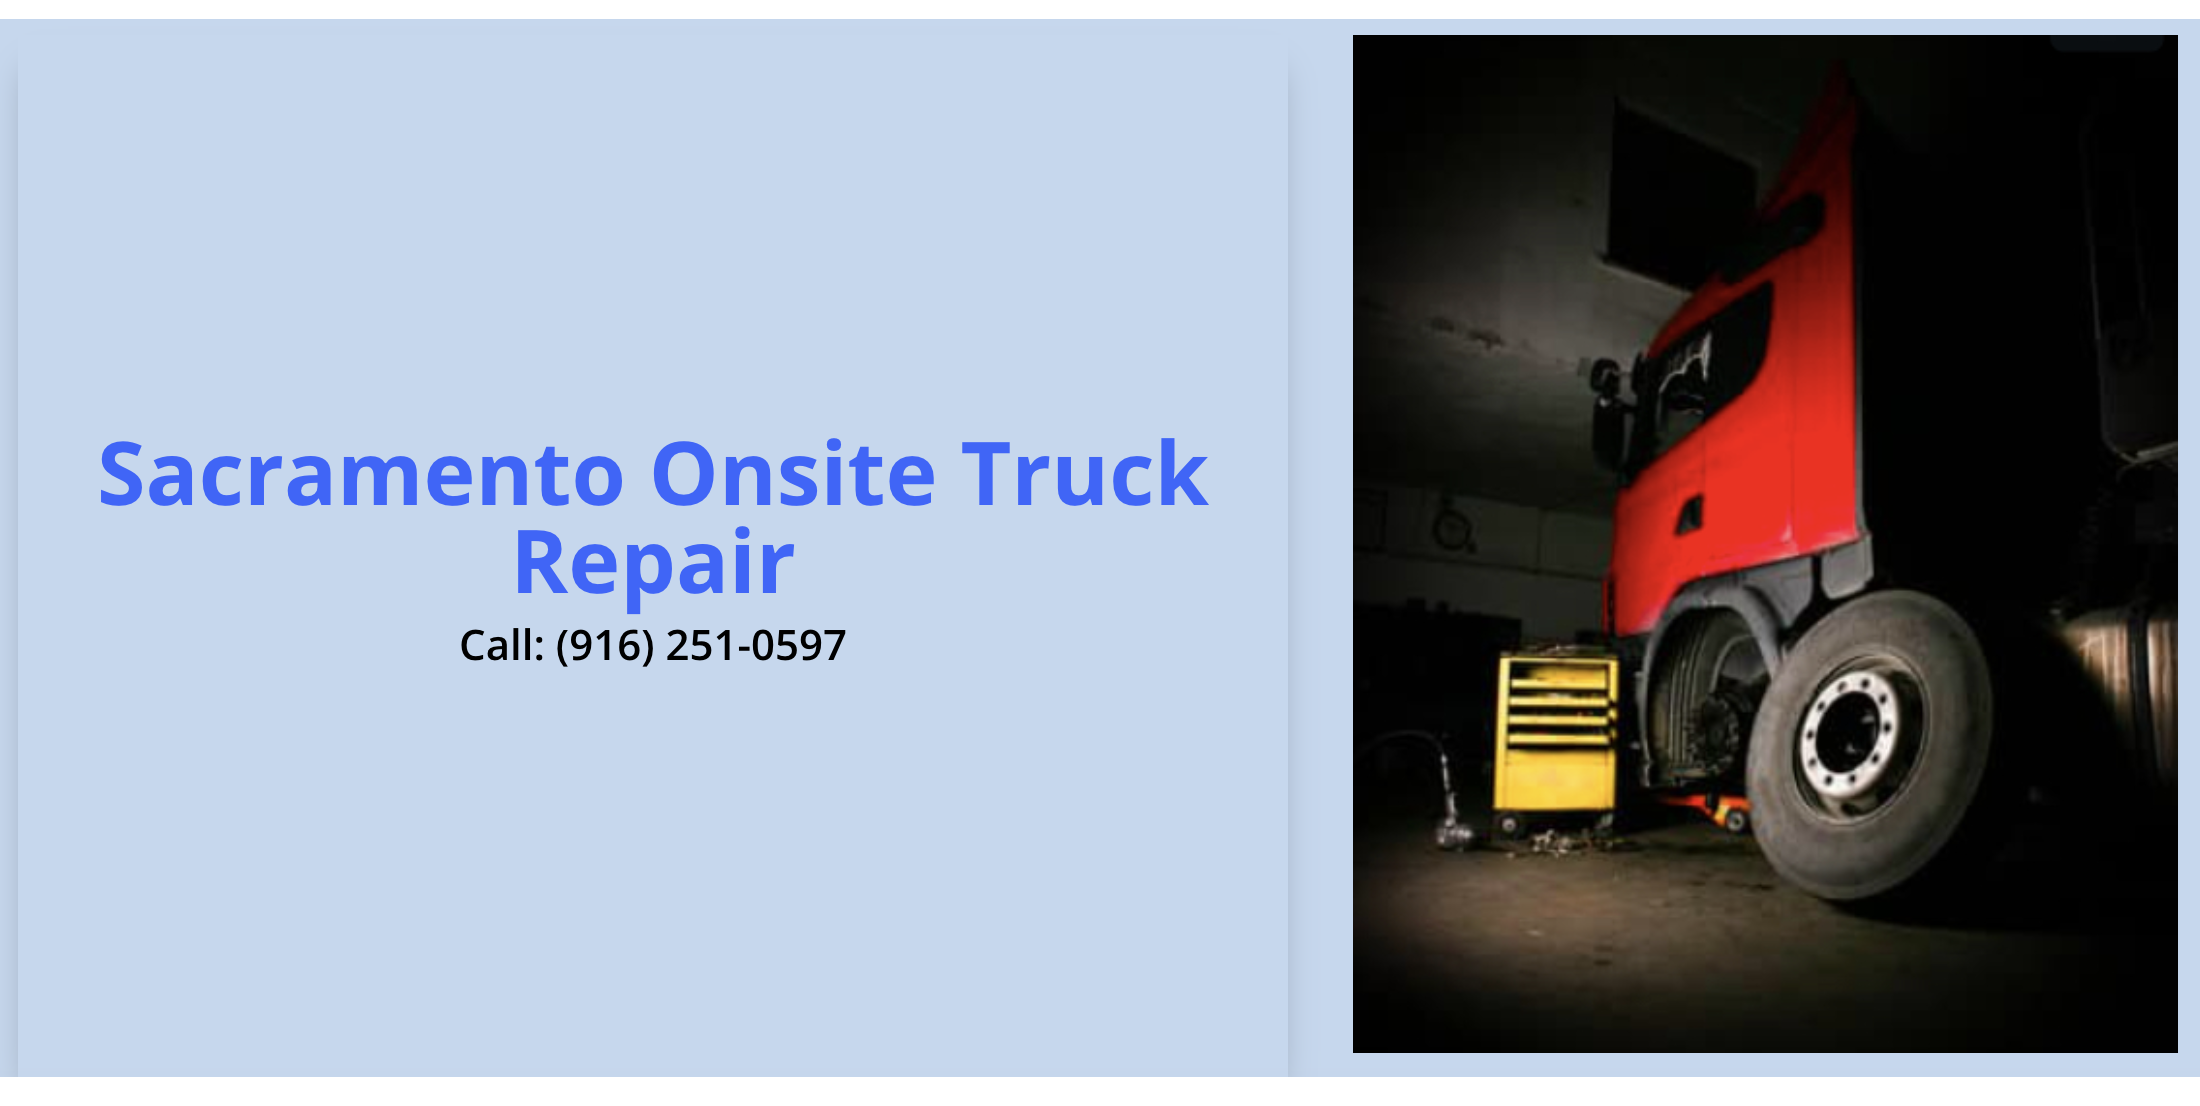 this picture shows sac onsite truck repair